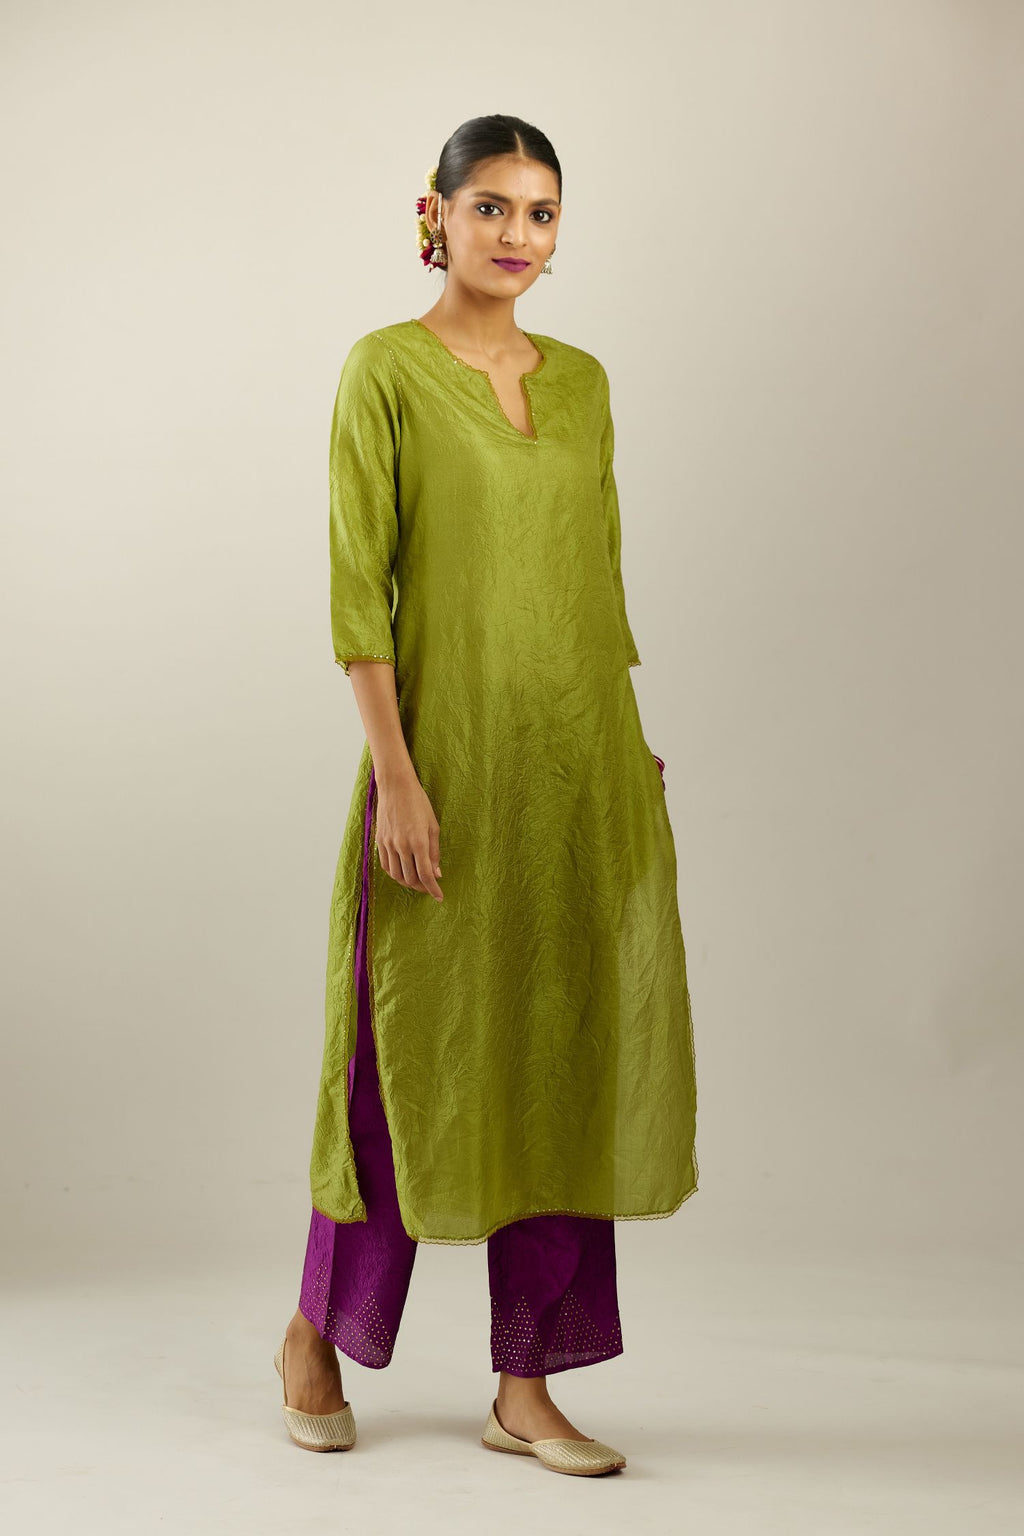 Apple green silk straight kurta set, highlighted with organza and sequins at edges.